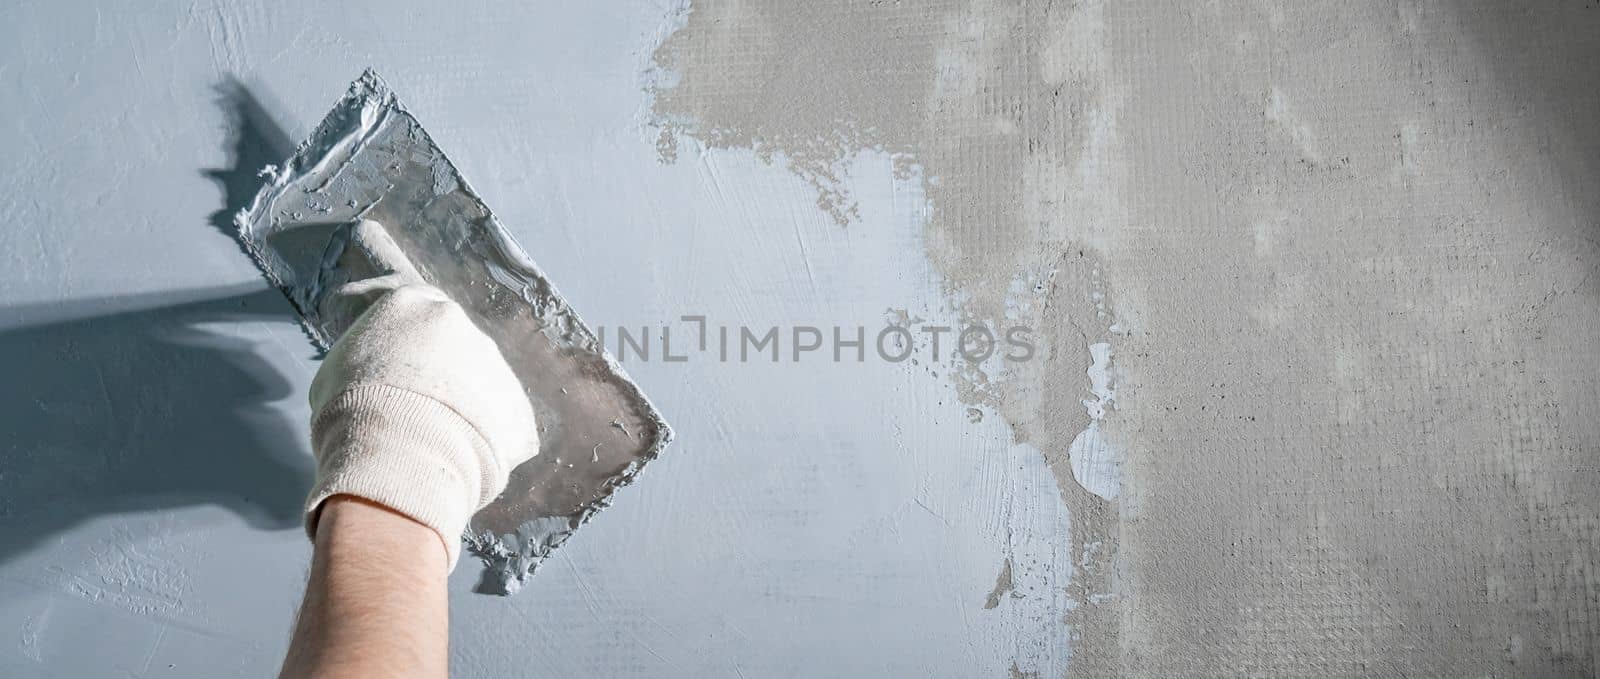 masonry tools for building and repairing walls and floors, trowel in hand. Banner with copy space by Edophoto